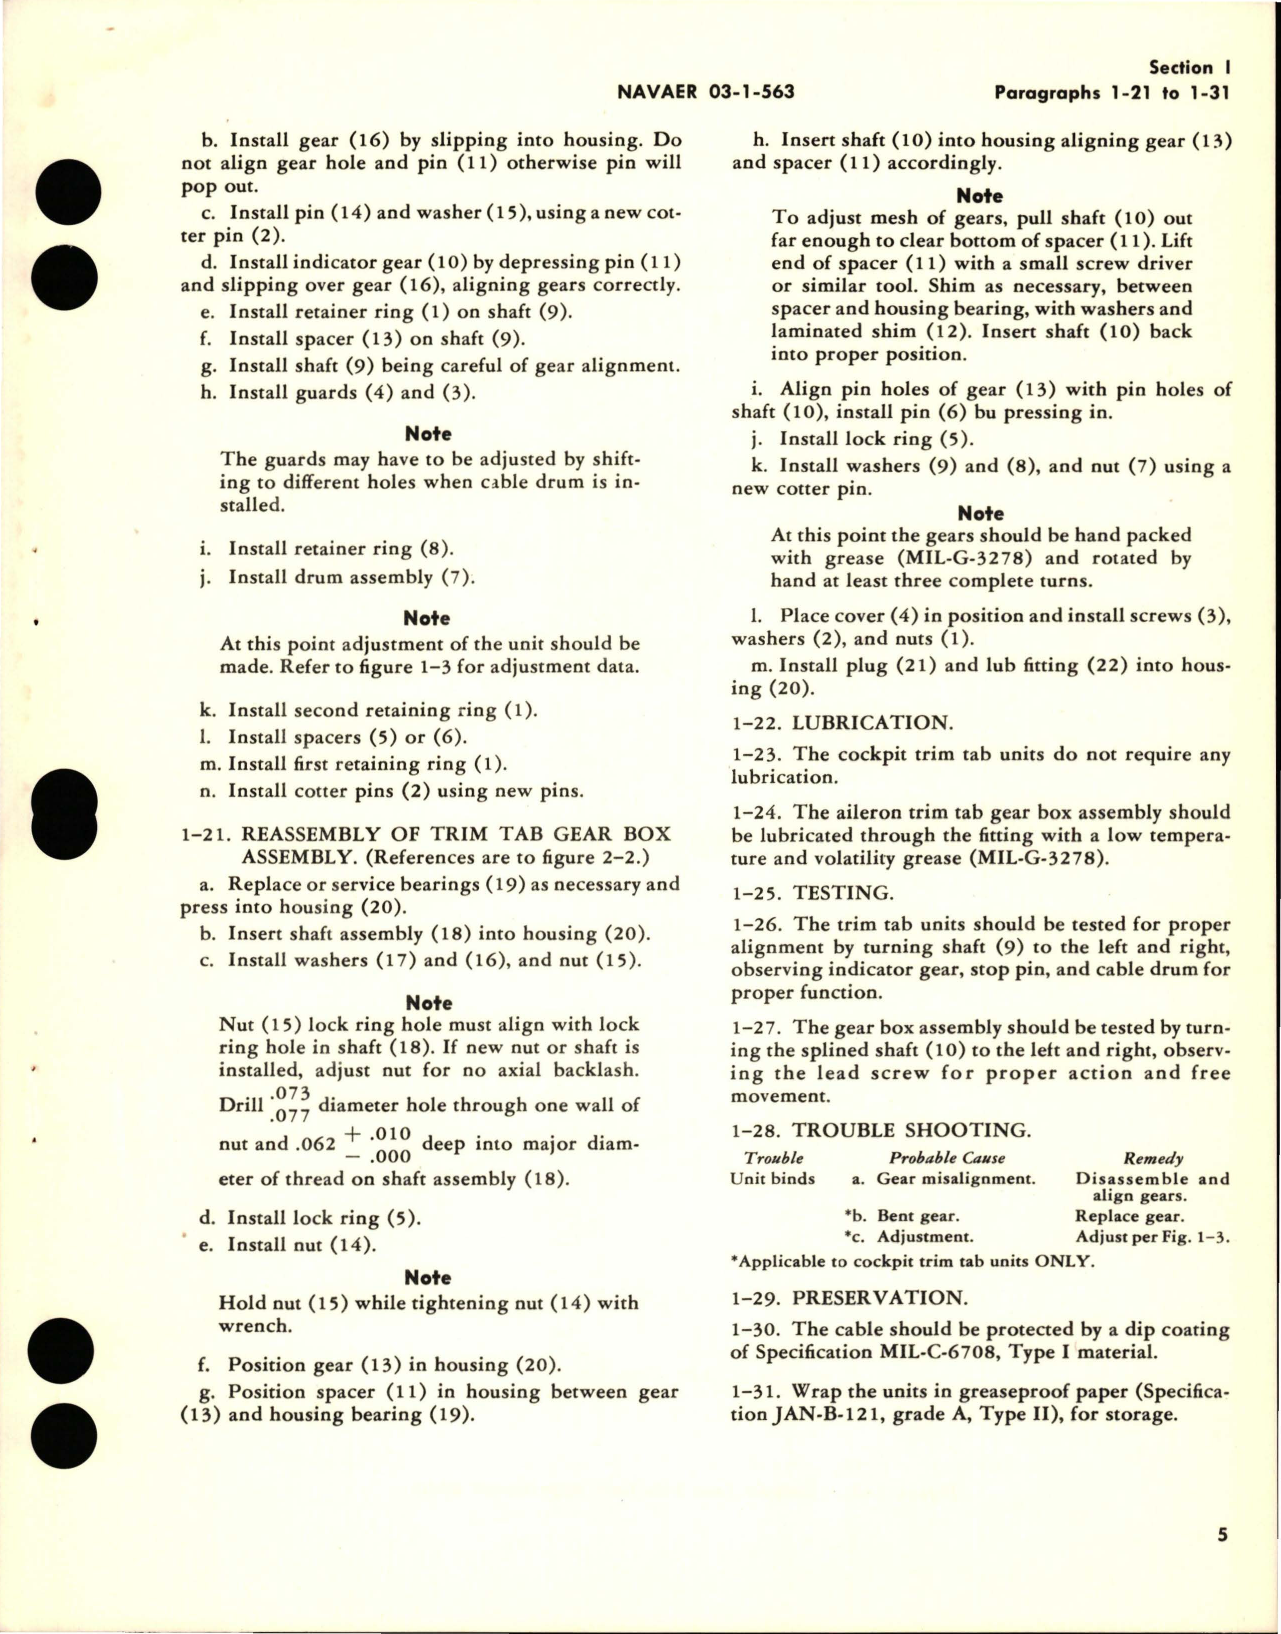 Sample page 7 from AirCorps Library document: Overhaul Instructions with Parts Catalog for Aileron and Rudder Cockpit Trim Tab Units and Aileron Trim Tab Gear Box 